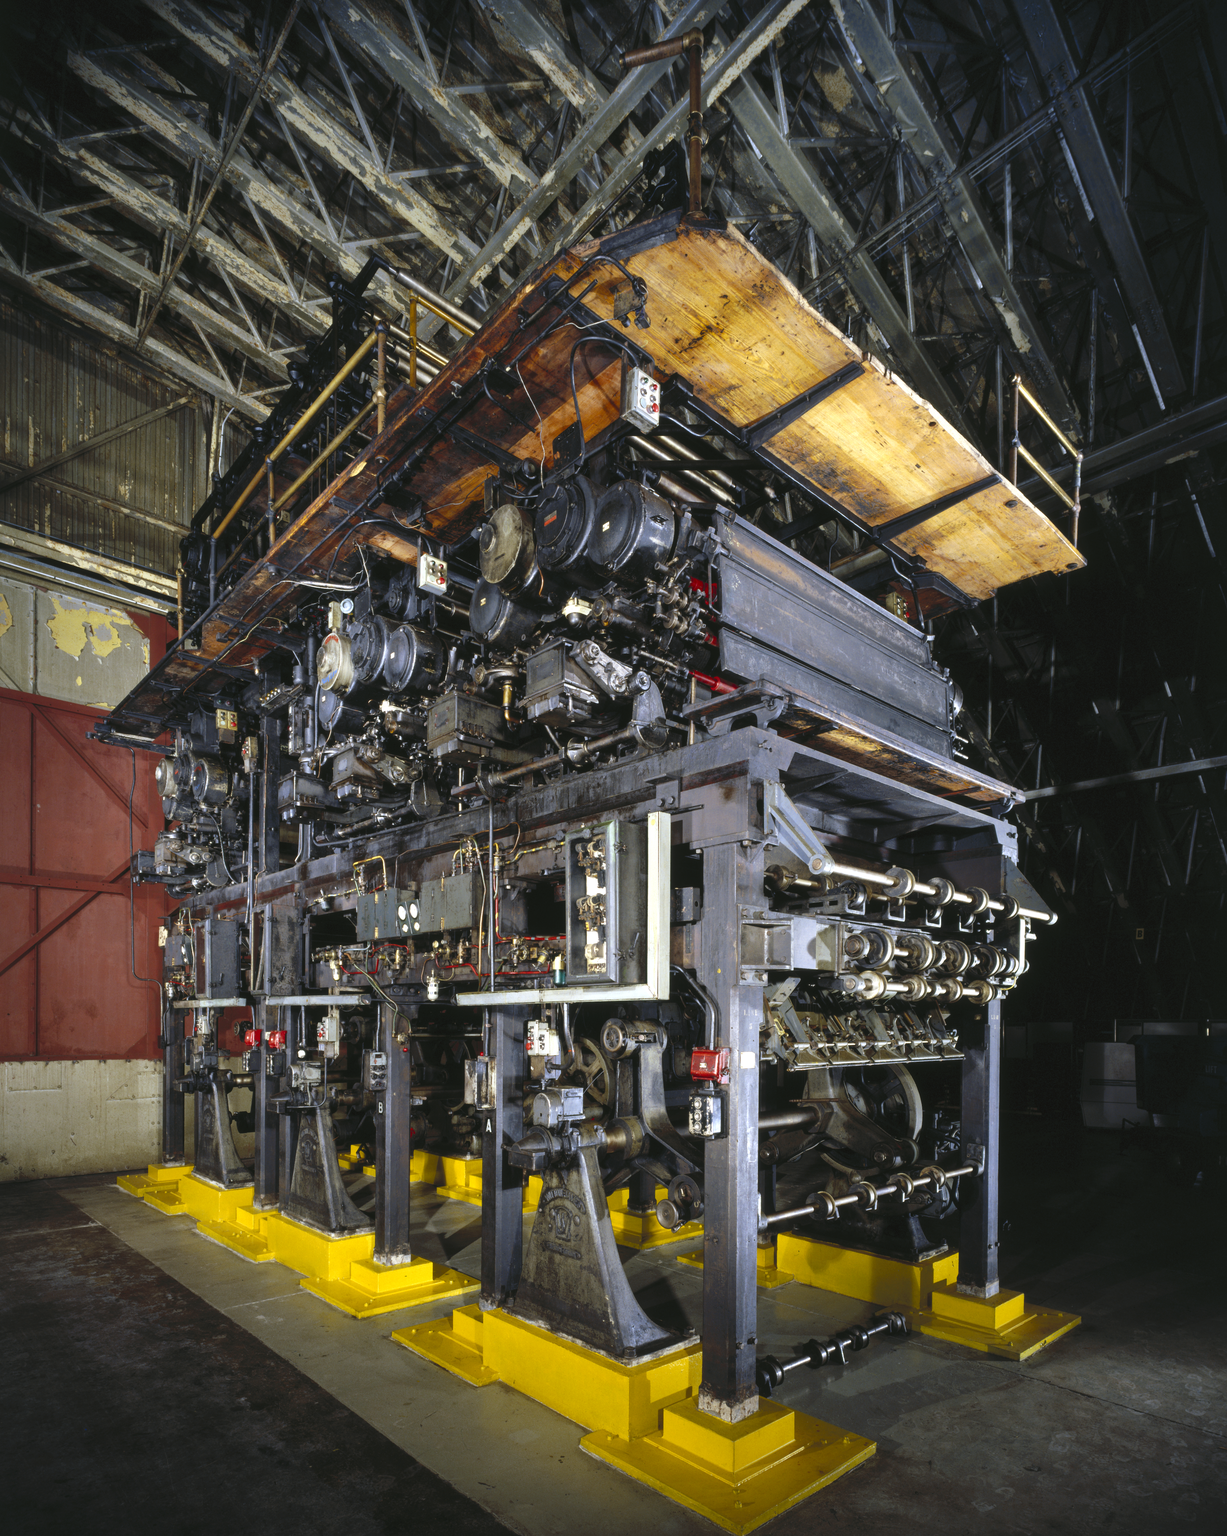 This three-story high printing press was used by the Daily Mail and Evening News (1927-1987).